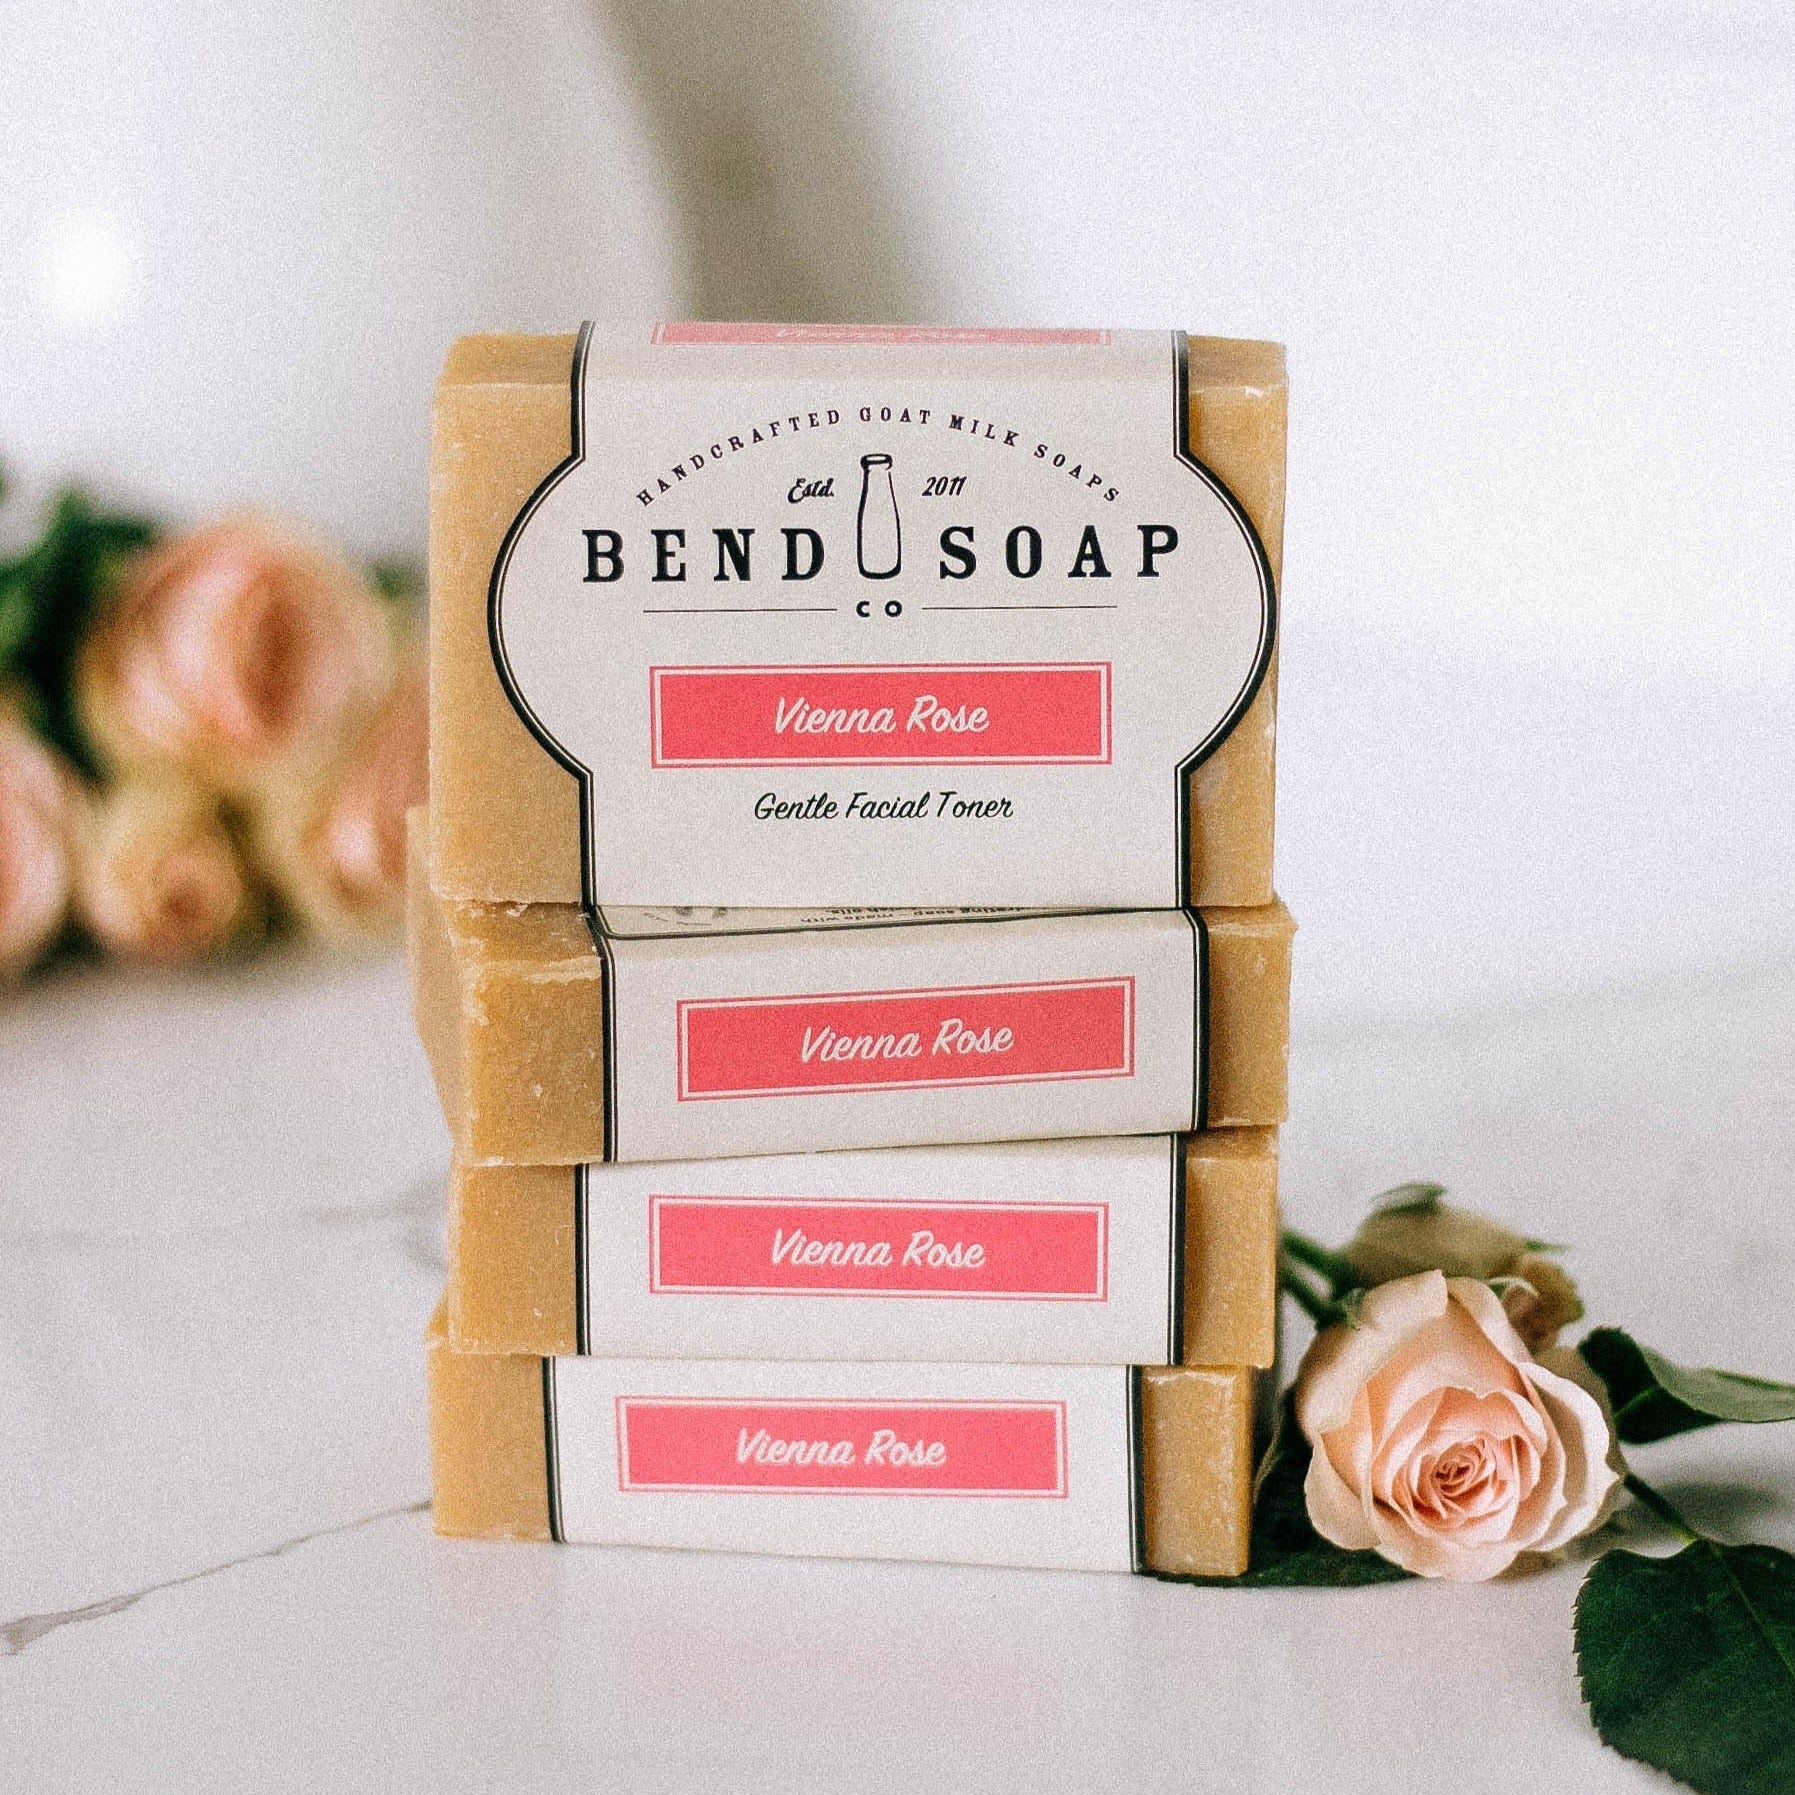 Vienna Rose Goat Milk Soap stack of four bars